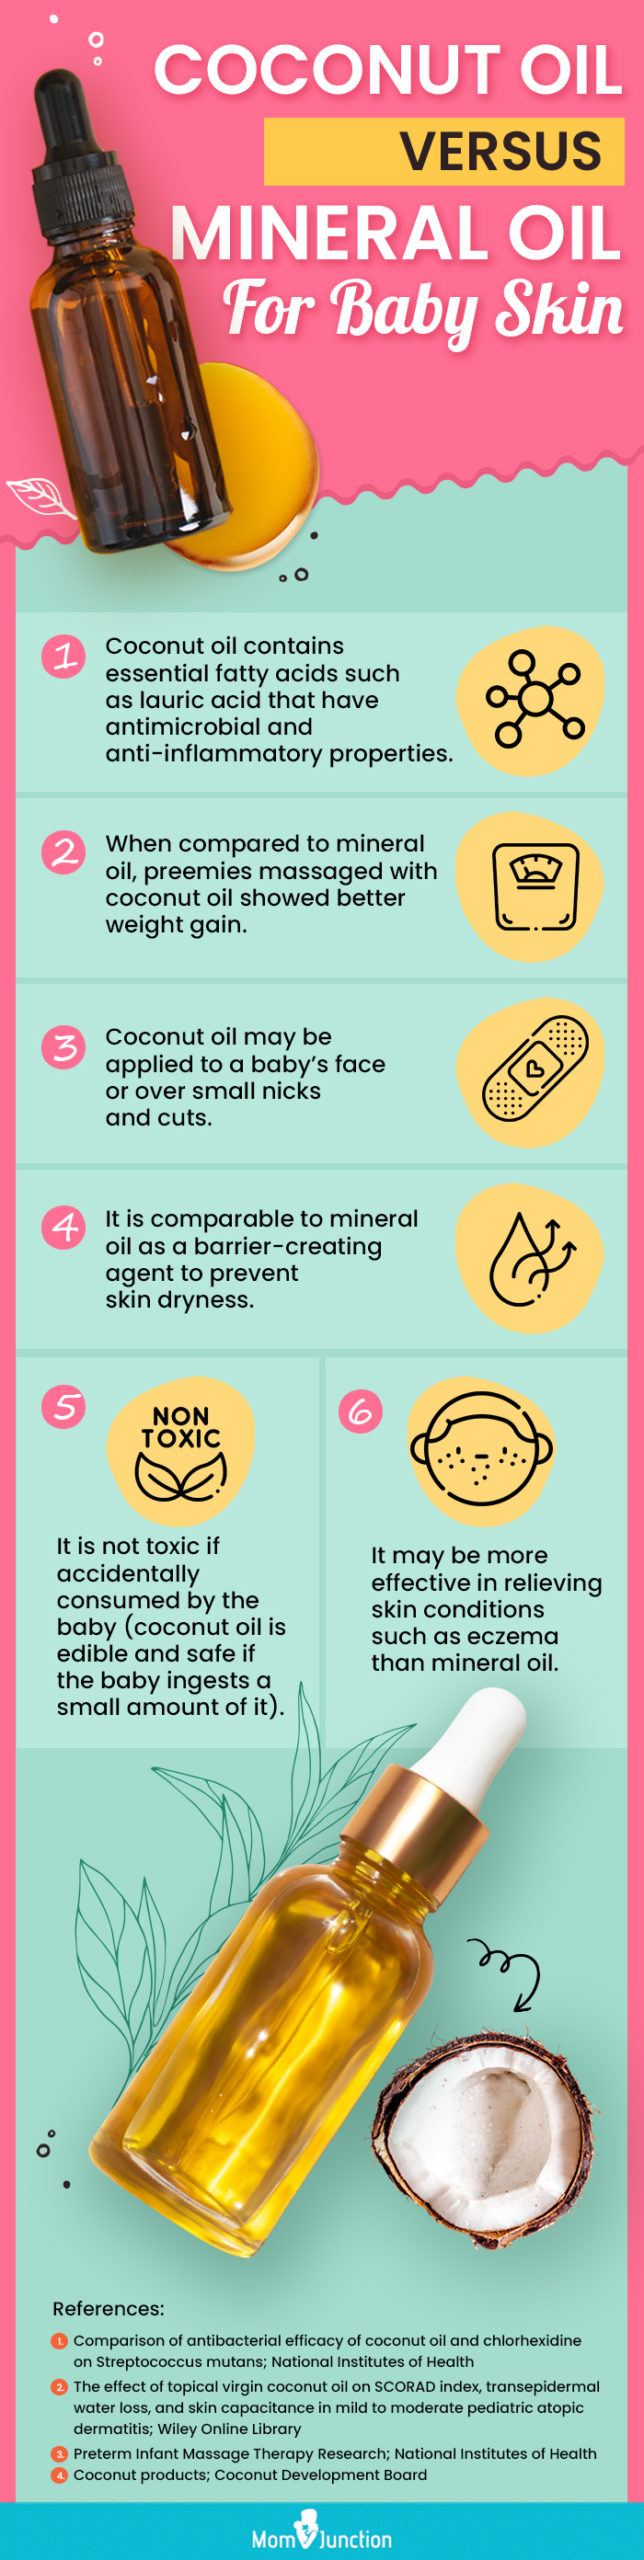 coconut oil versus mineral oil for baby skin (infographic)